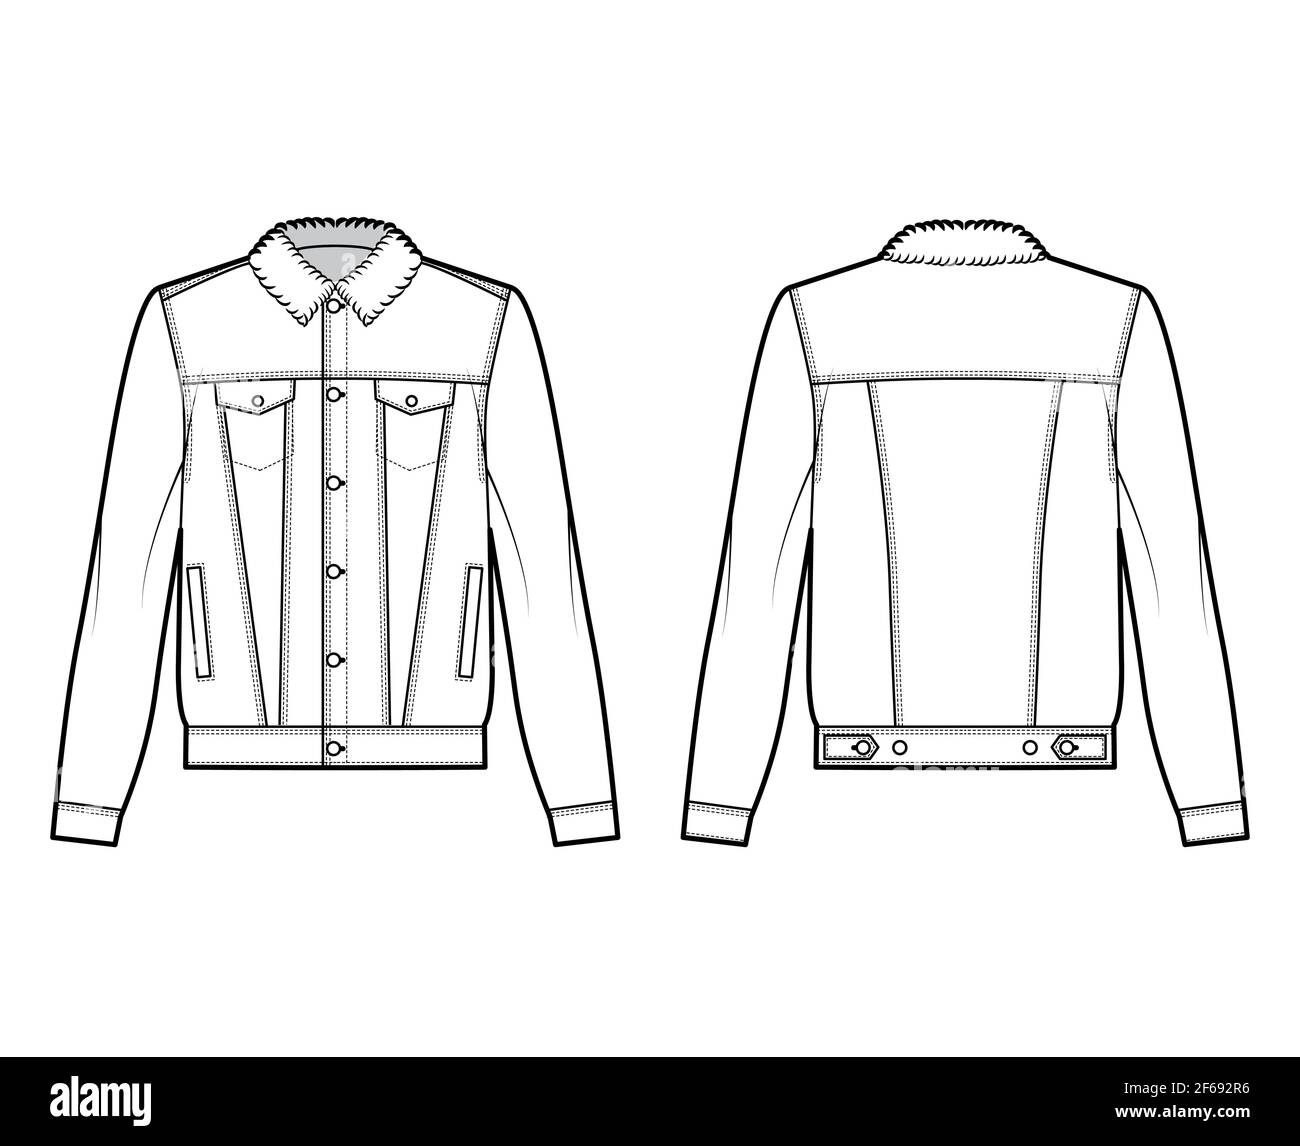 Sherpa lined denim jacket technical fashion illustration with oversized body, flap welt pockets, button closure, long sleeves. Flat apparel front, back, white color style. Women, men unisex CAD mockup Stock Vector